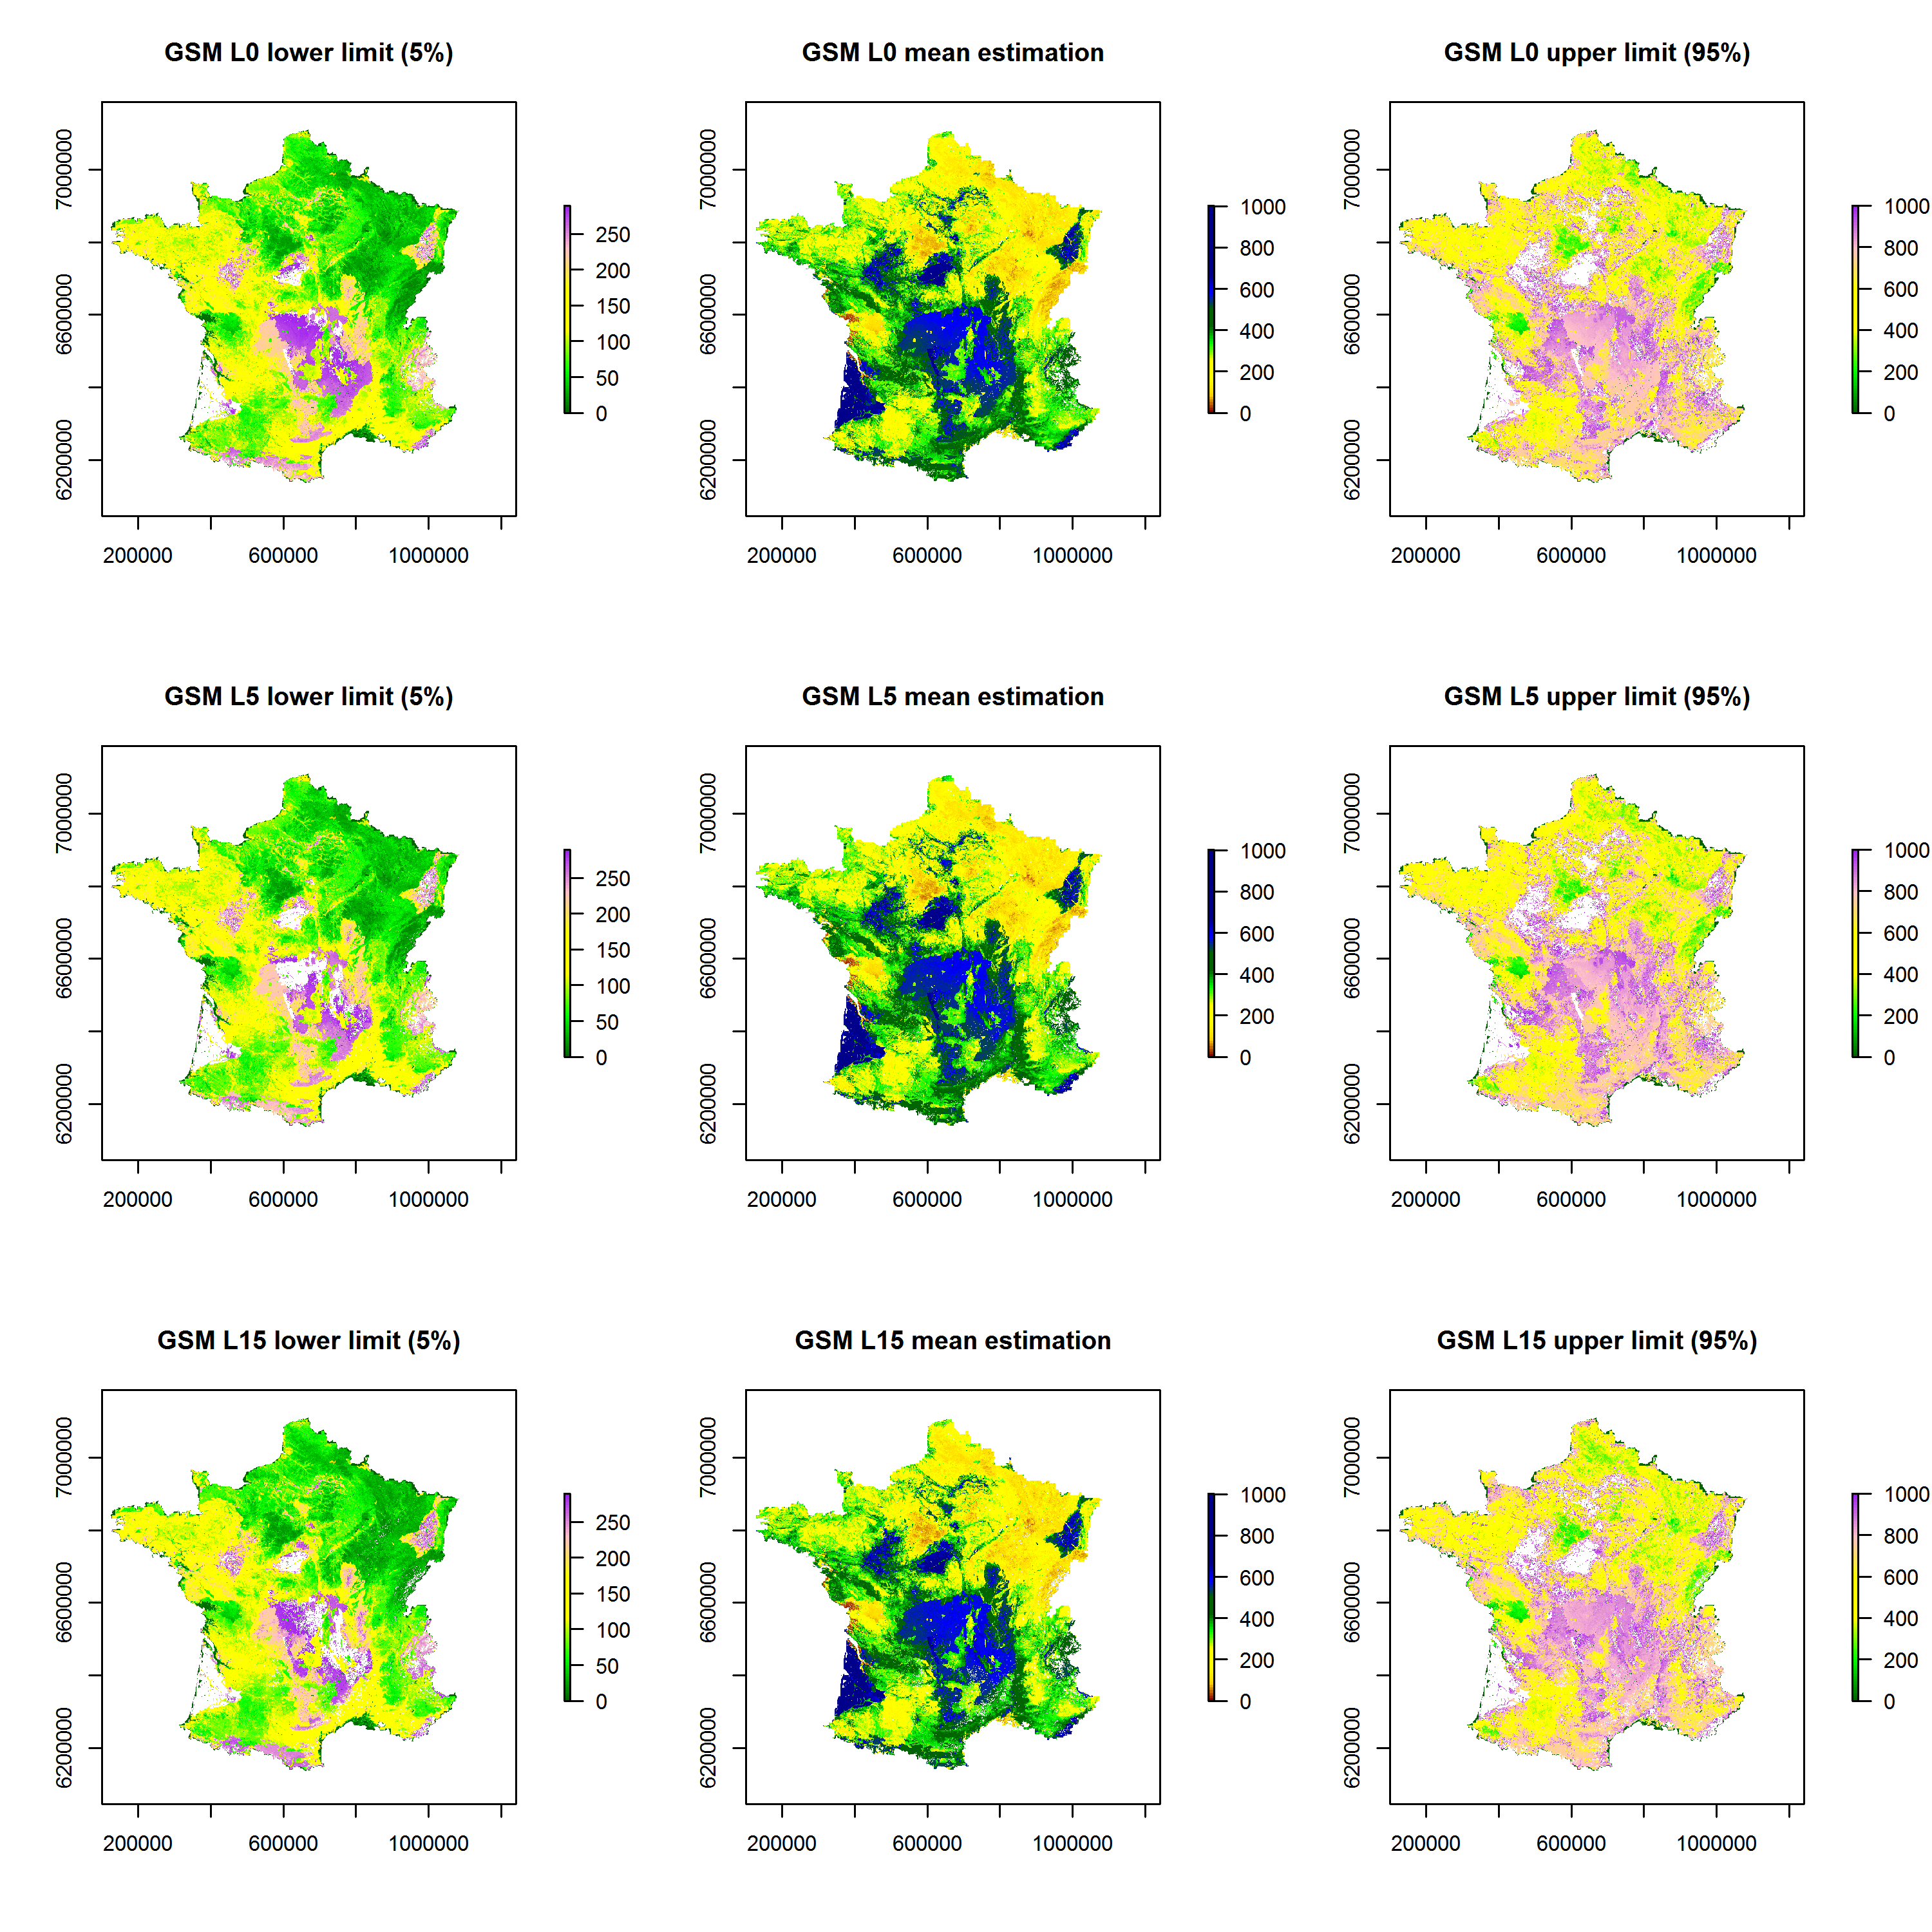 Sand content maps for the 0-5 cm, 5-15 cm and 15-30 cm soil layers according to the GlobalSoilMap specifications for metropolitan France 